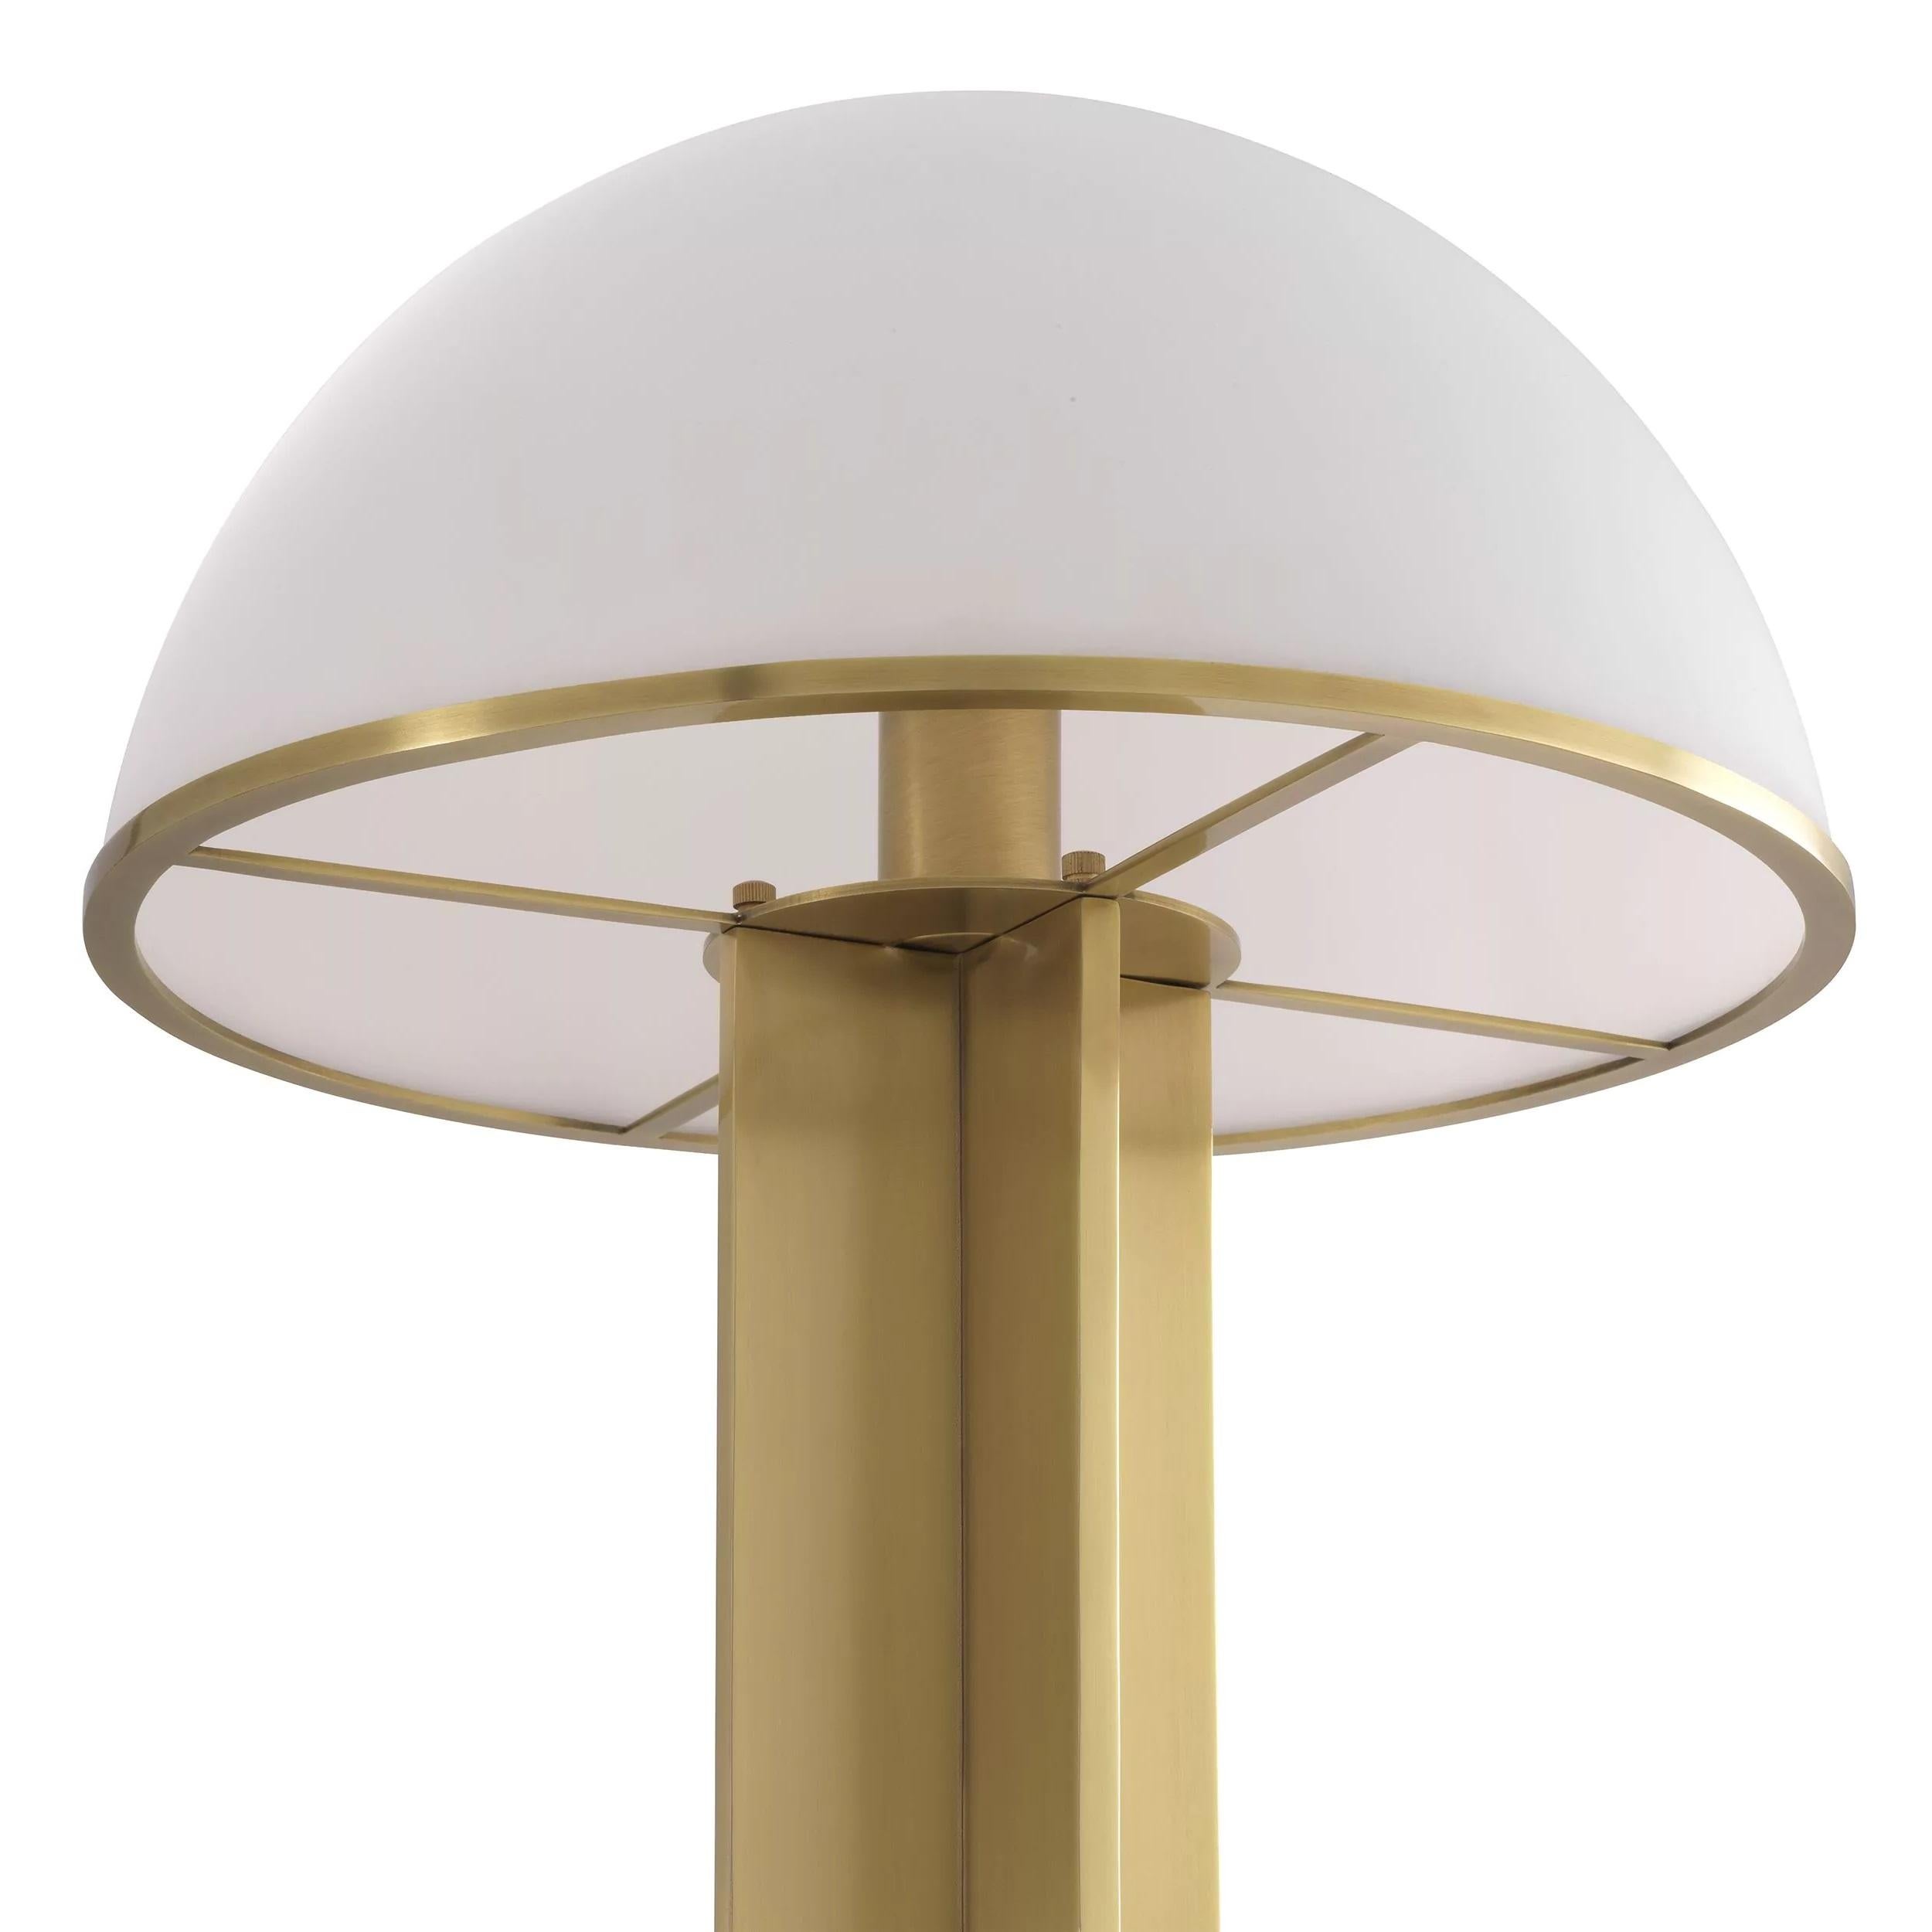 1920s Design and Art Deco style brass and white opaline glass floor lamp composed of a brass finishes metal structure adorned with a handmade white opaline glass mushroom shaped shade. 1 E27 light bulb required.